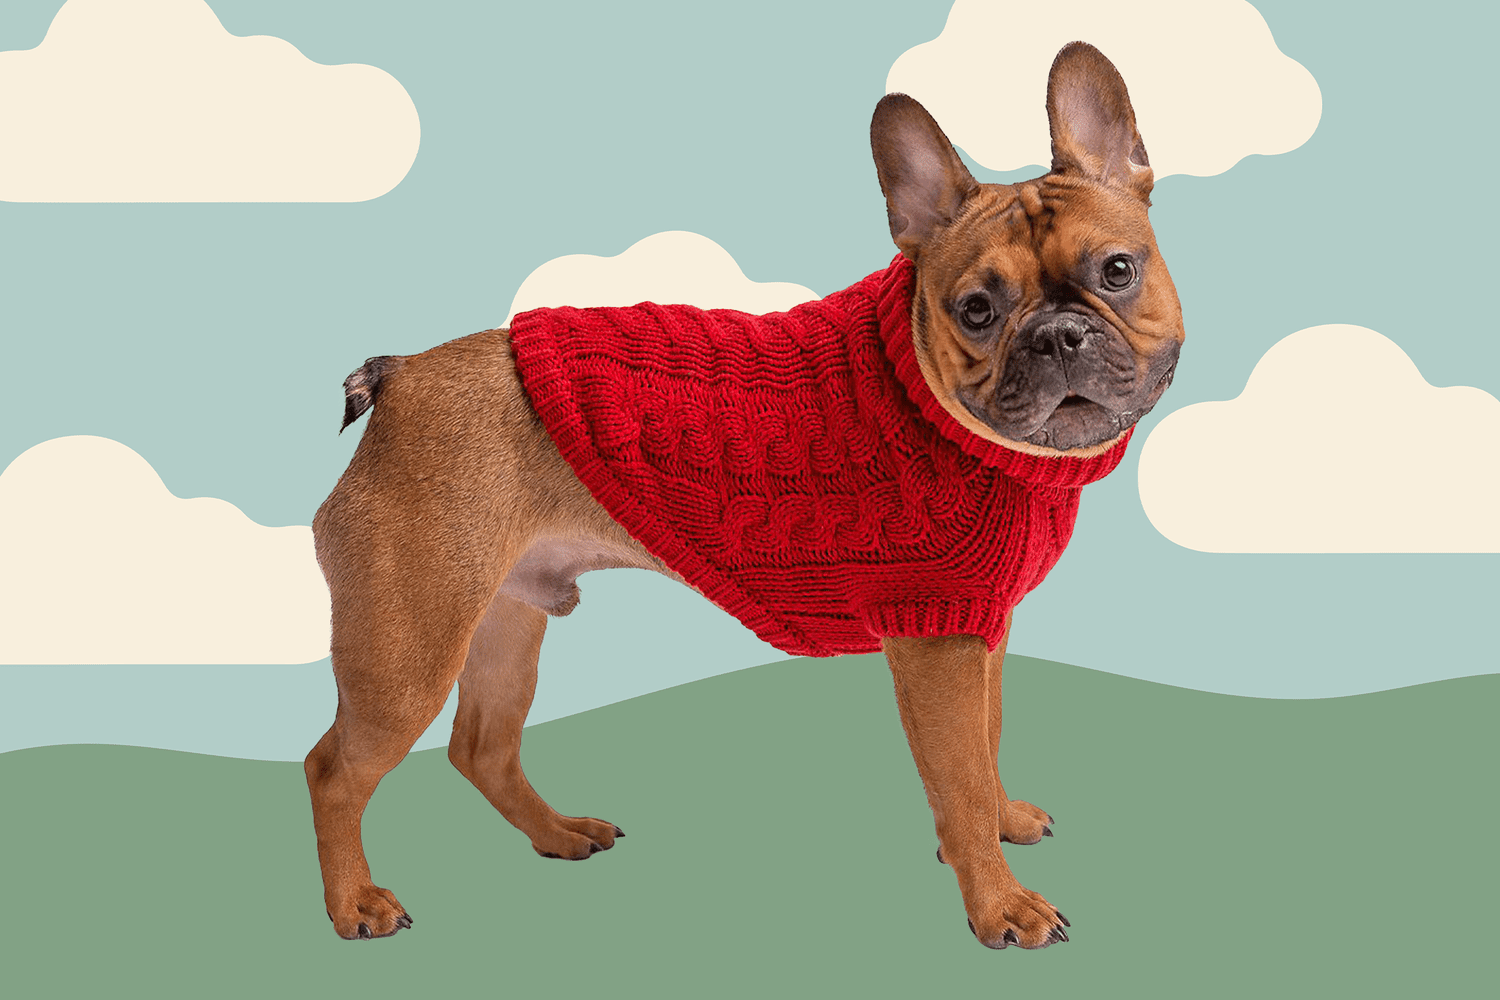 L ubest Pet Sweater Warm Jumper Dog Cat Twist Striped Sweater Coat in Autumn Early Winter Puppy Jacket Dogs Clothes Brown